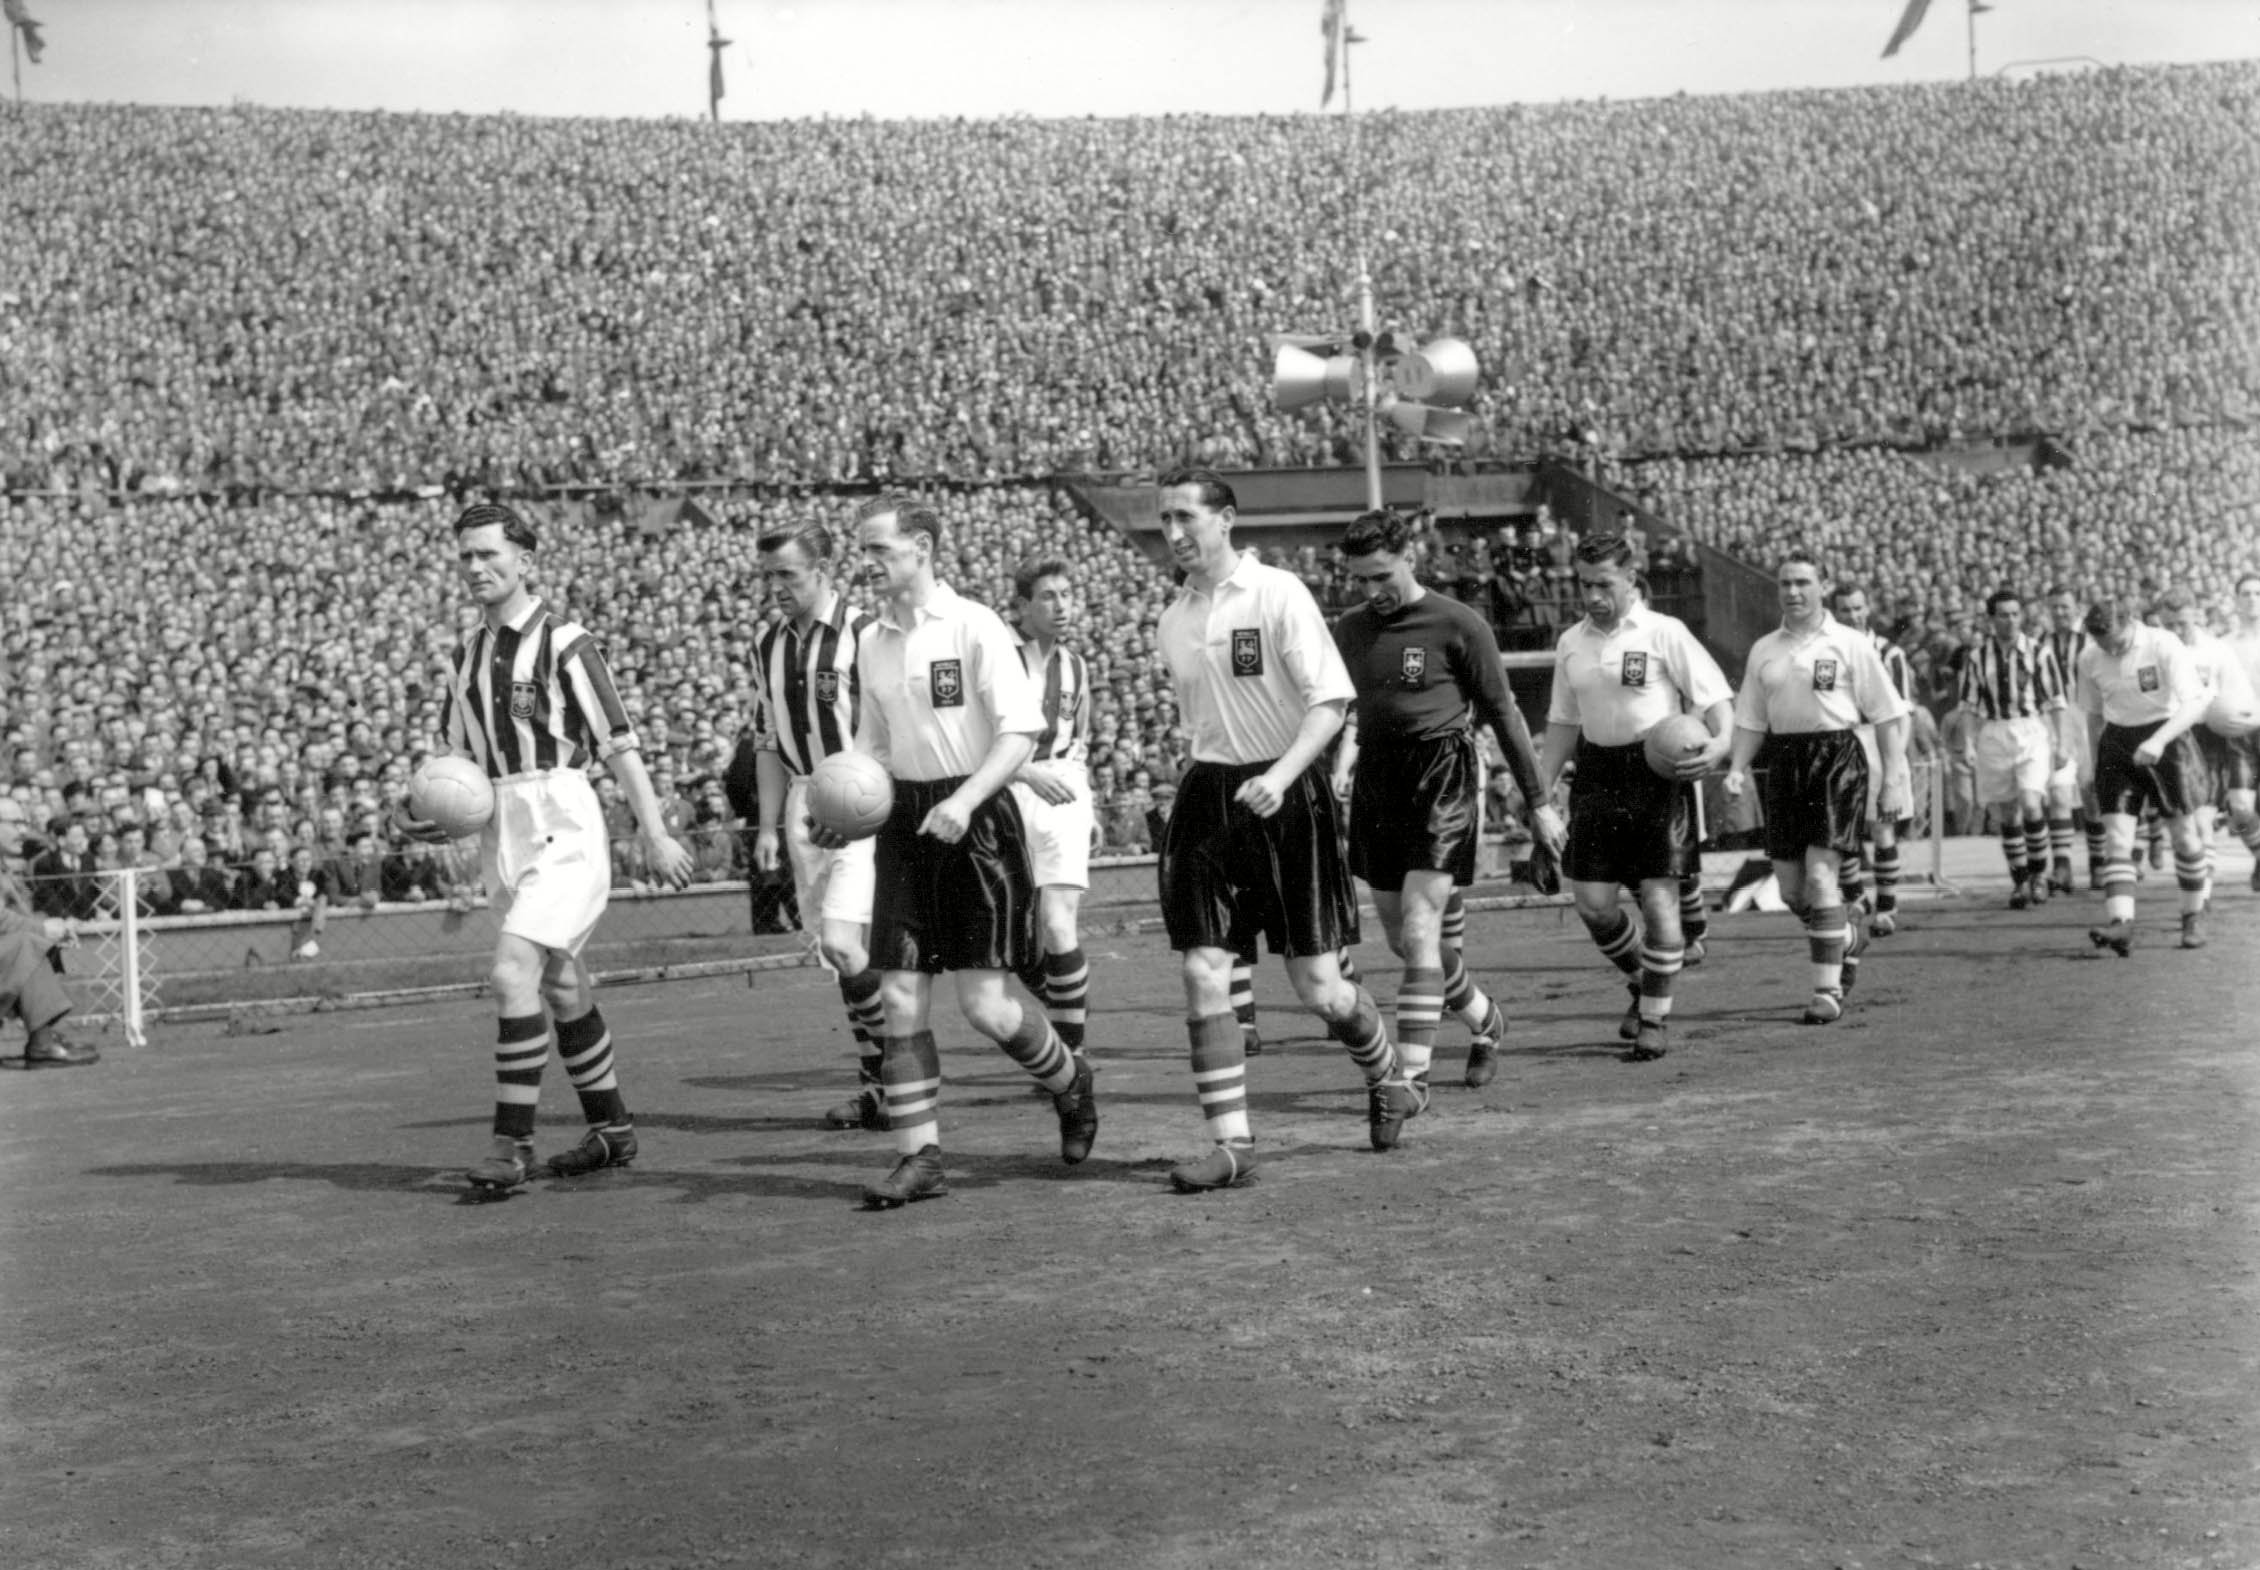 The two teams walk out on to the pitch before the 1954 FA Cup final